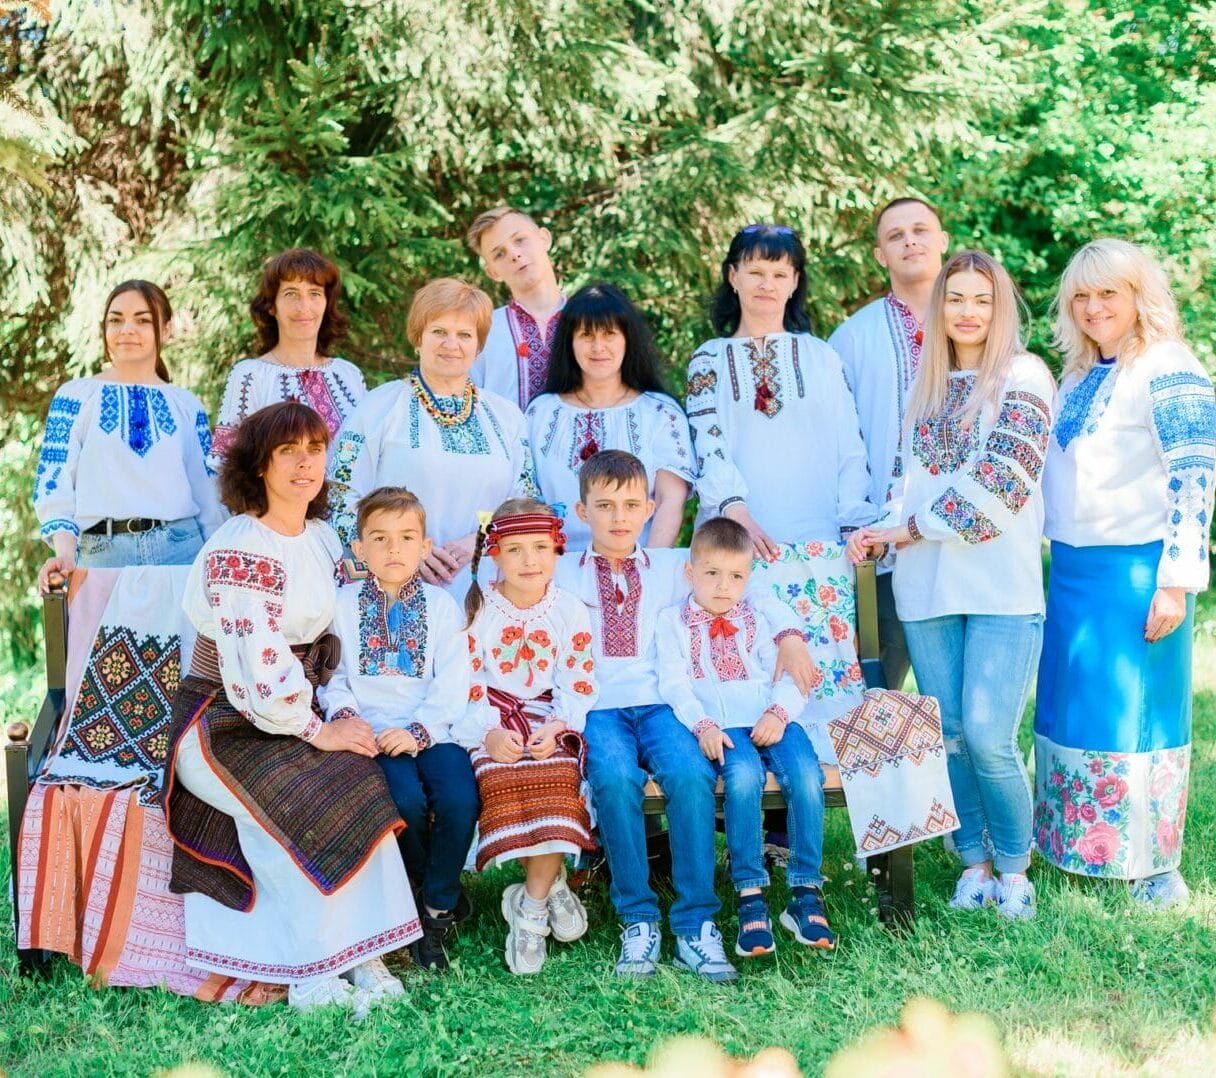 Internally displaced persons in the Murovane Community on the Vyshyvanka Day, 2022 